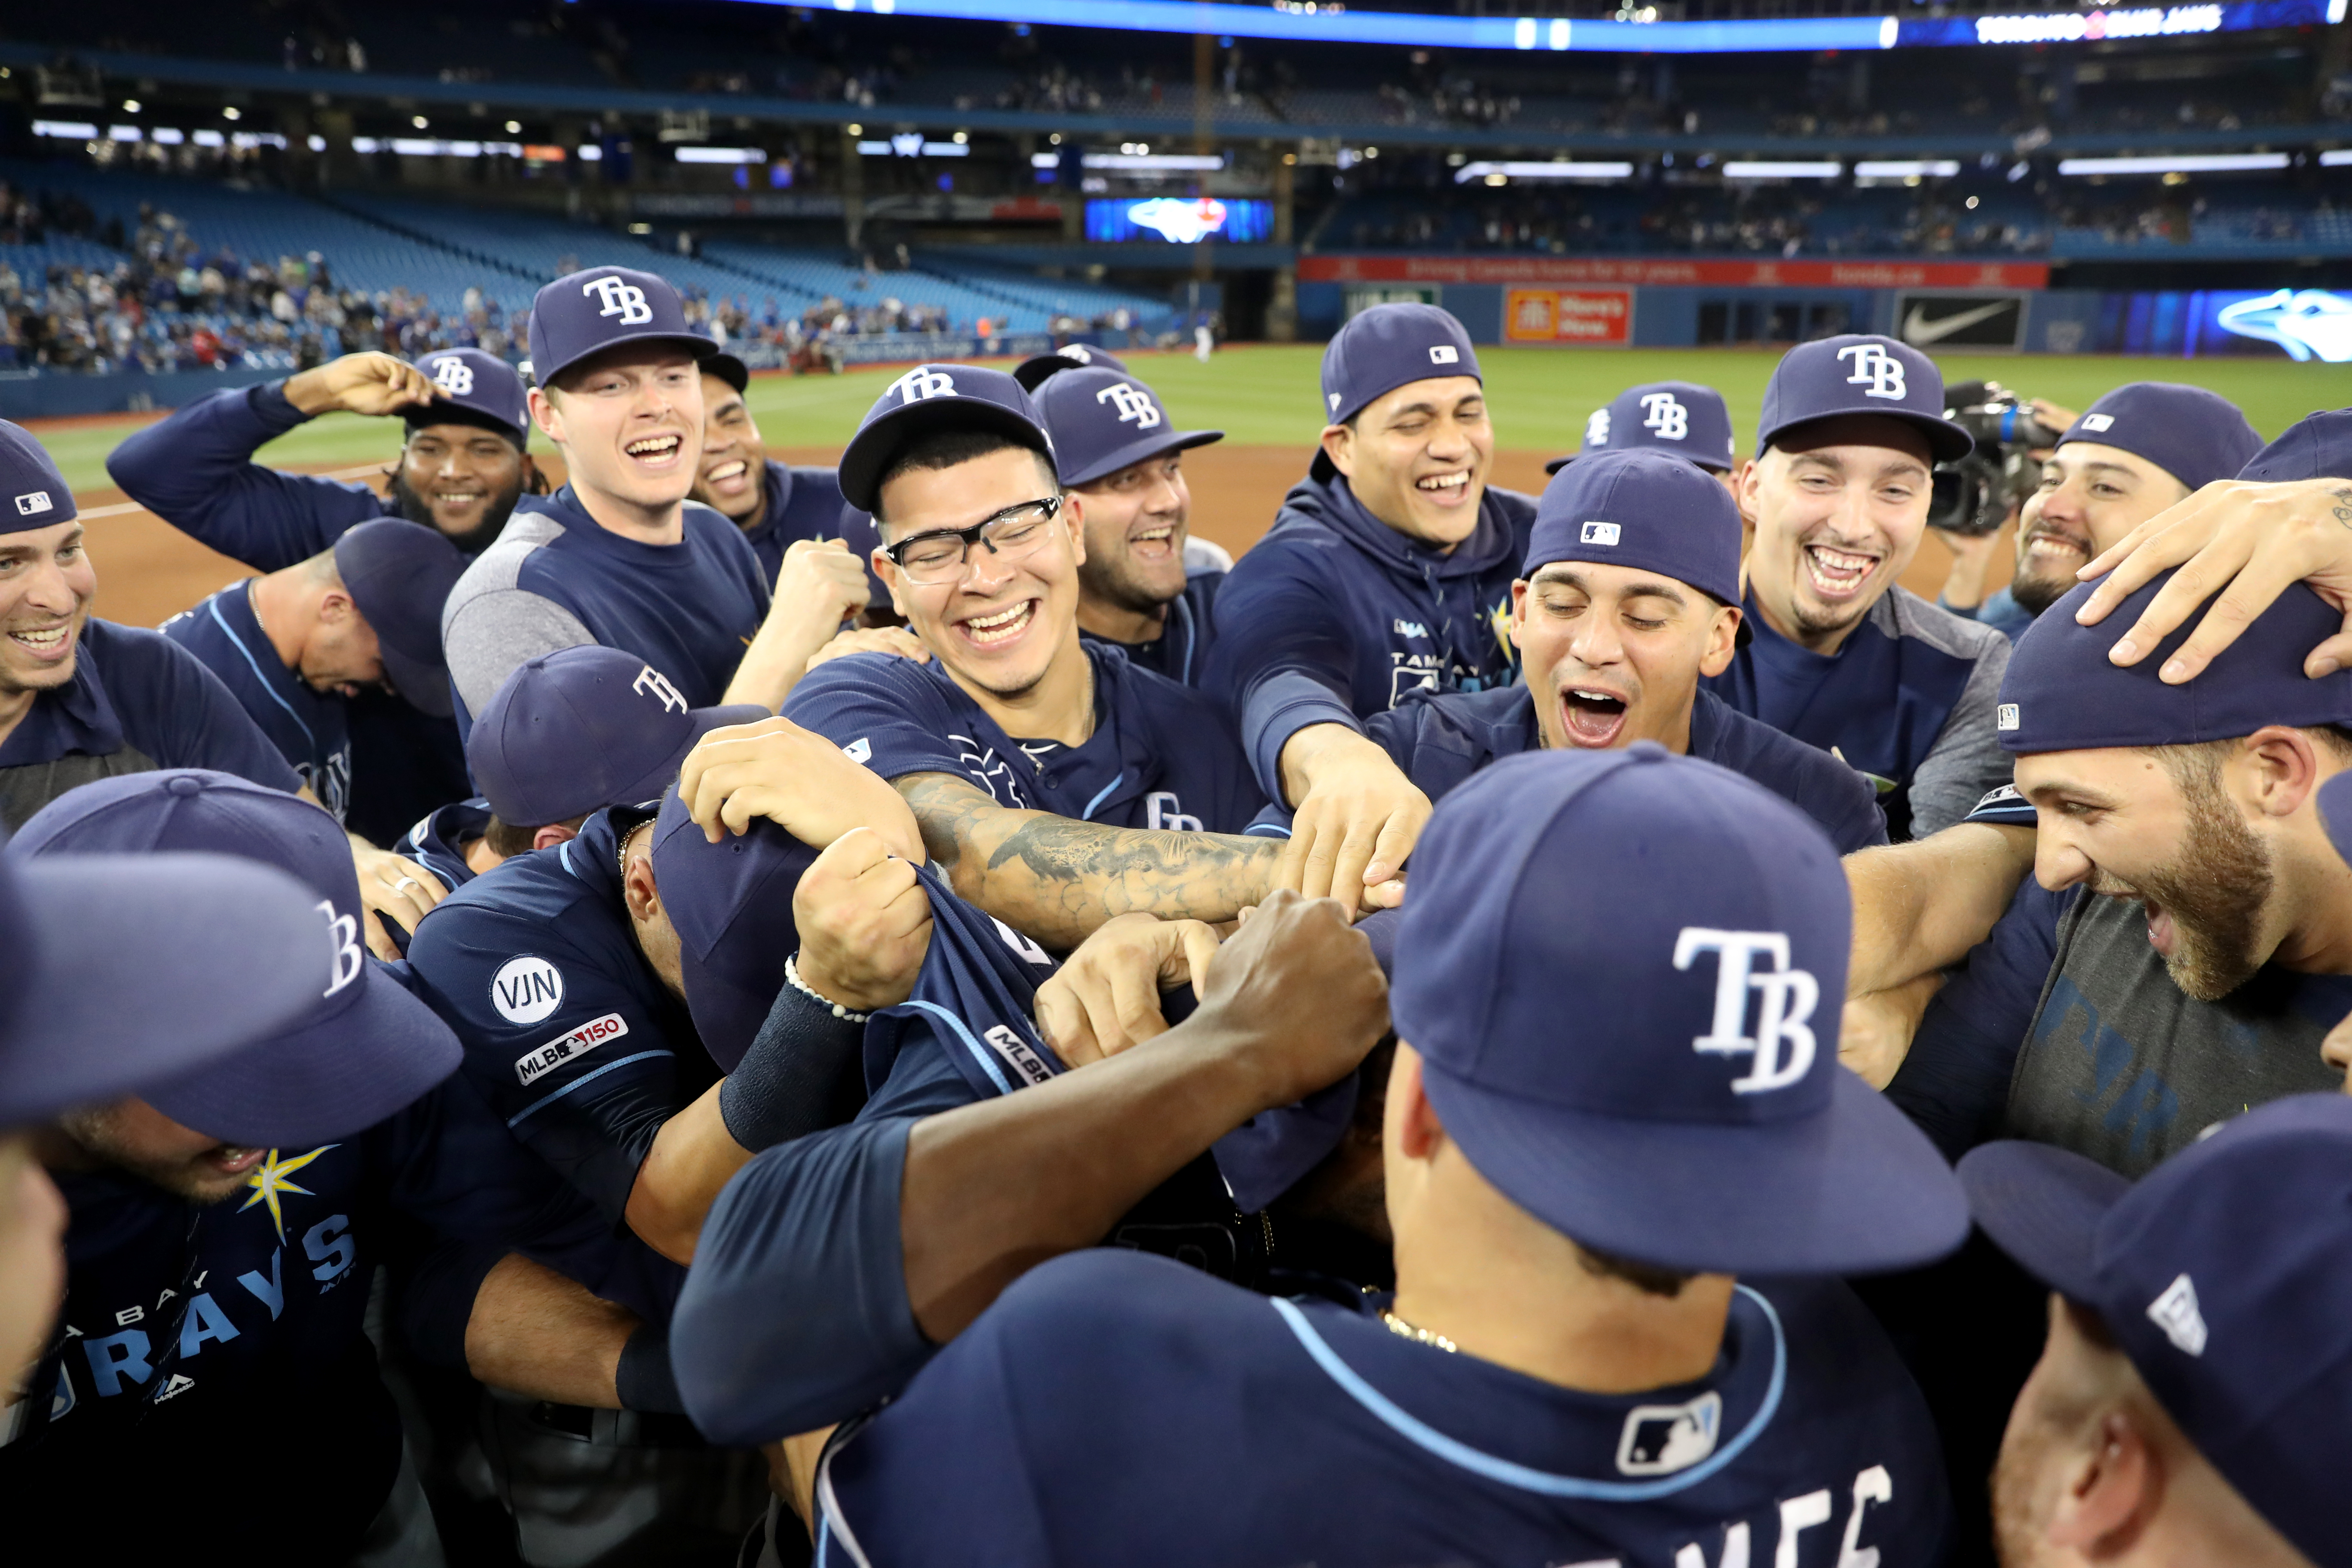 Tampa Bay Rays clinch playoff spot